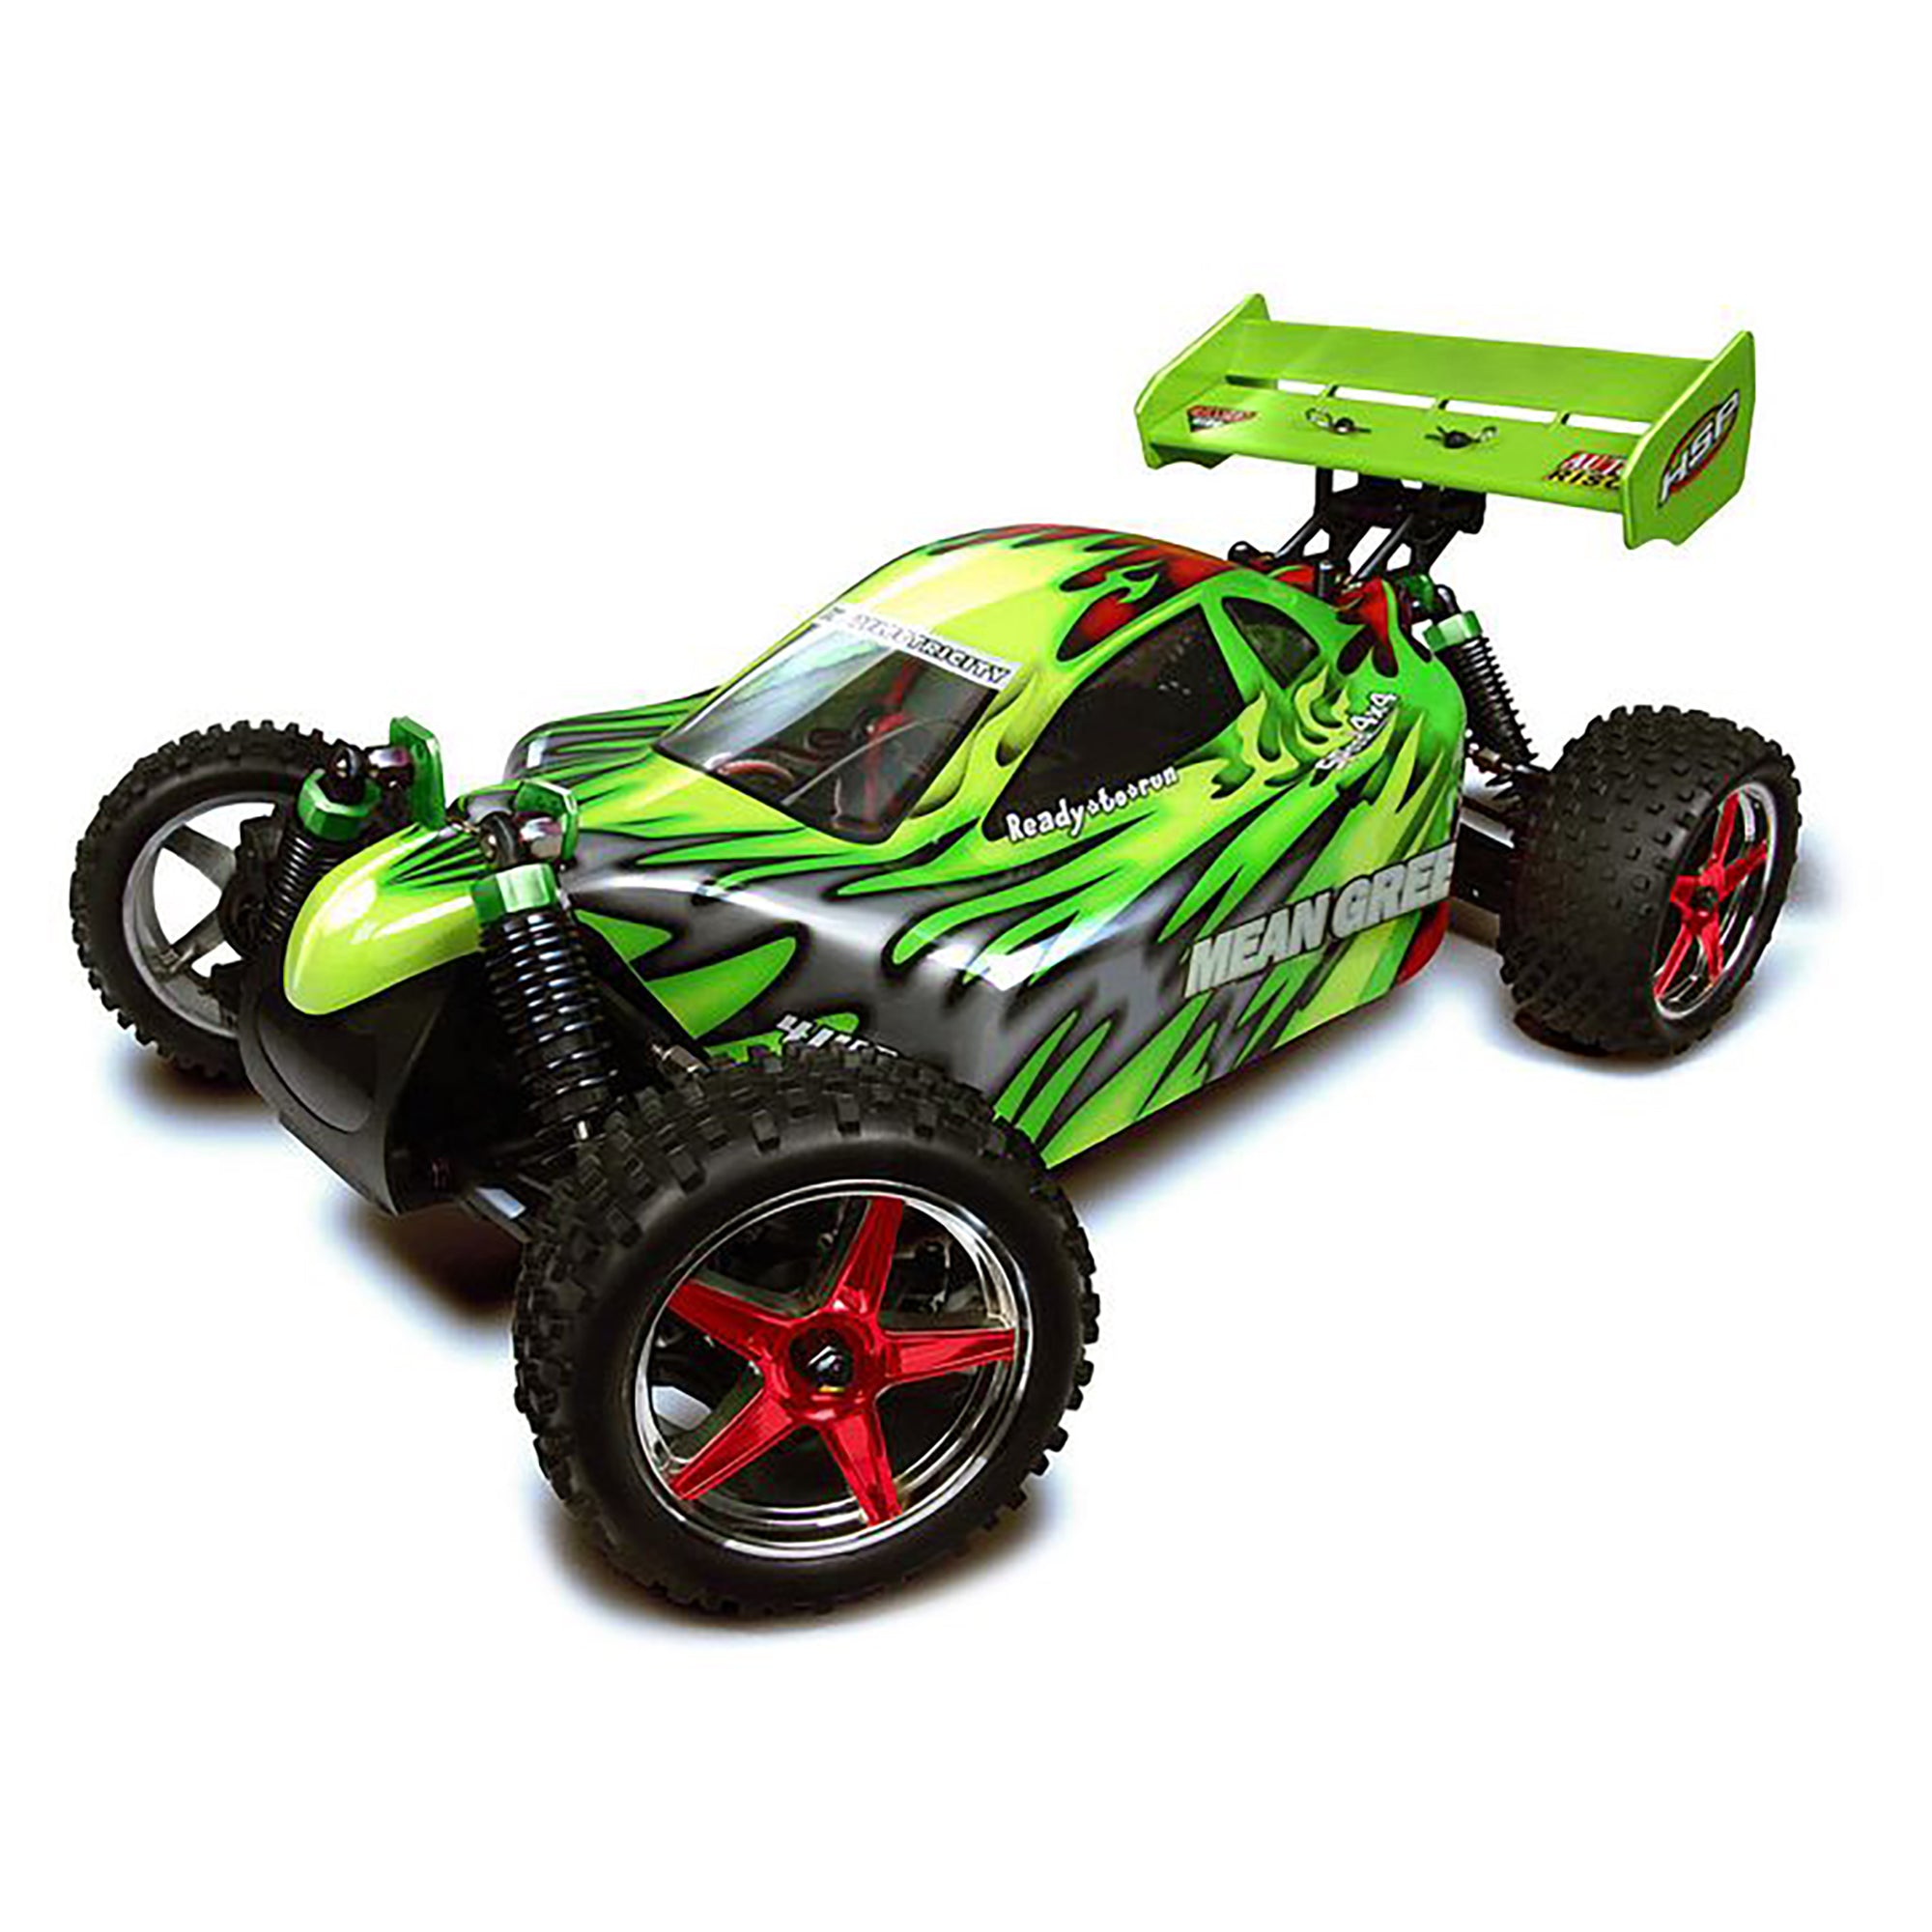 HSP Racing 94107-10707 Mean Green 2.4Ghz Electric 4WD Off Road RTR 1/10 Scale RC Buggy